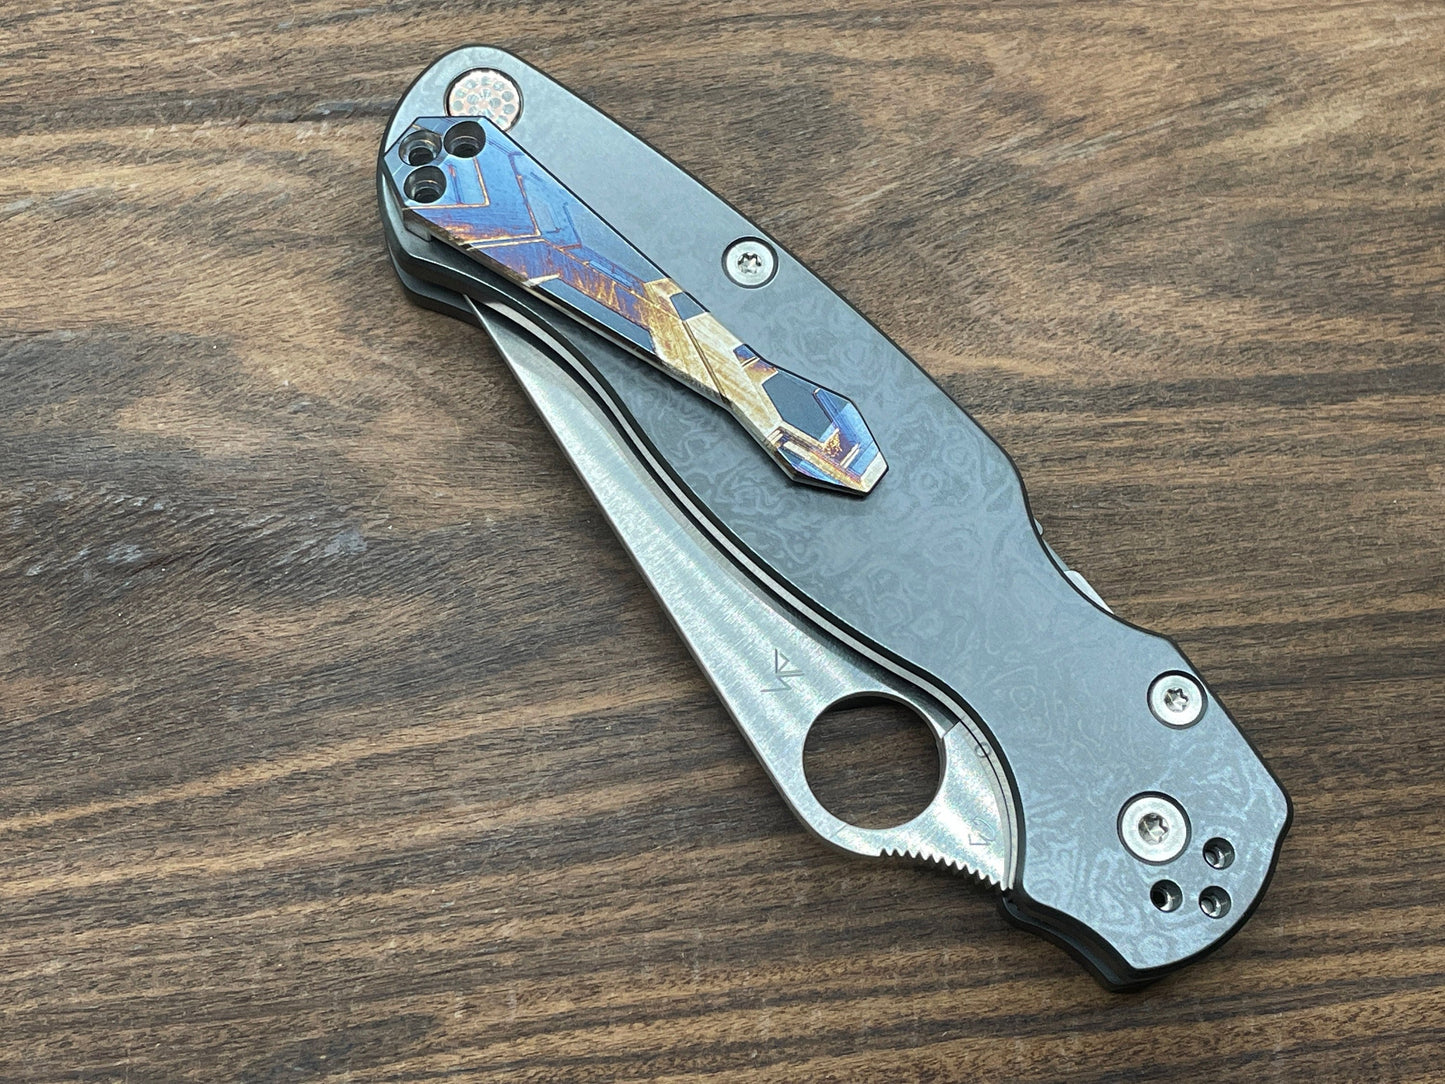 FALCON Dmd heat ano engraved Titanium CLIP for most Spyderco models